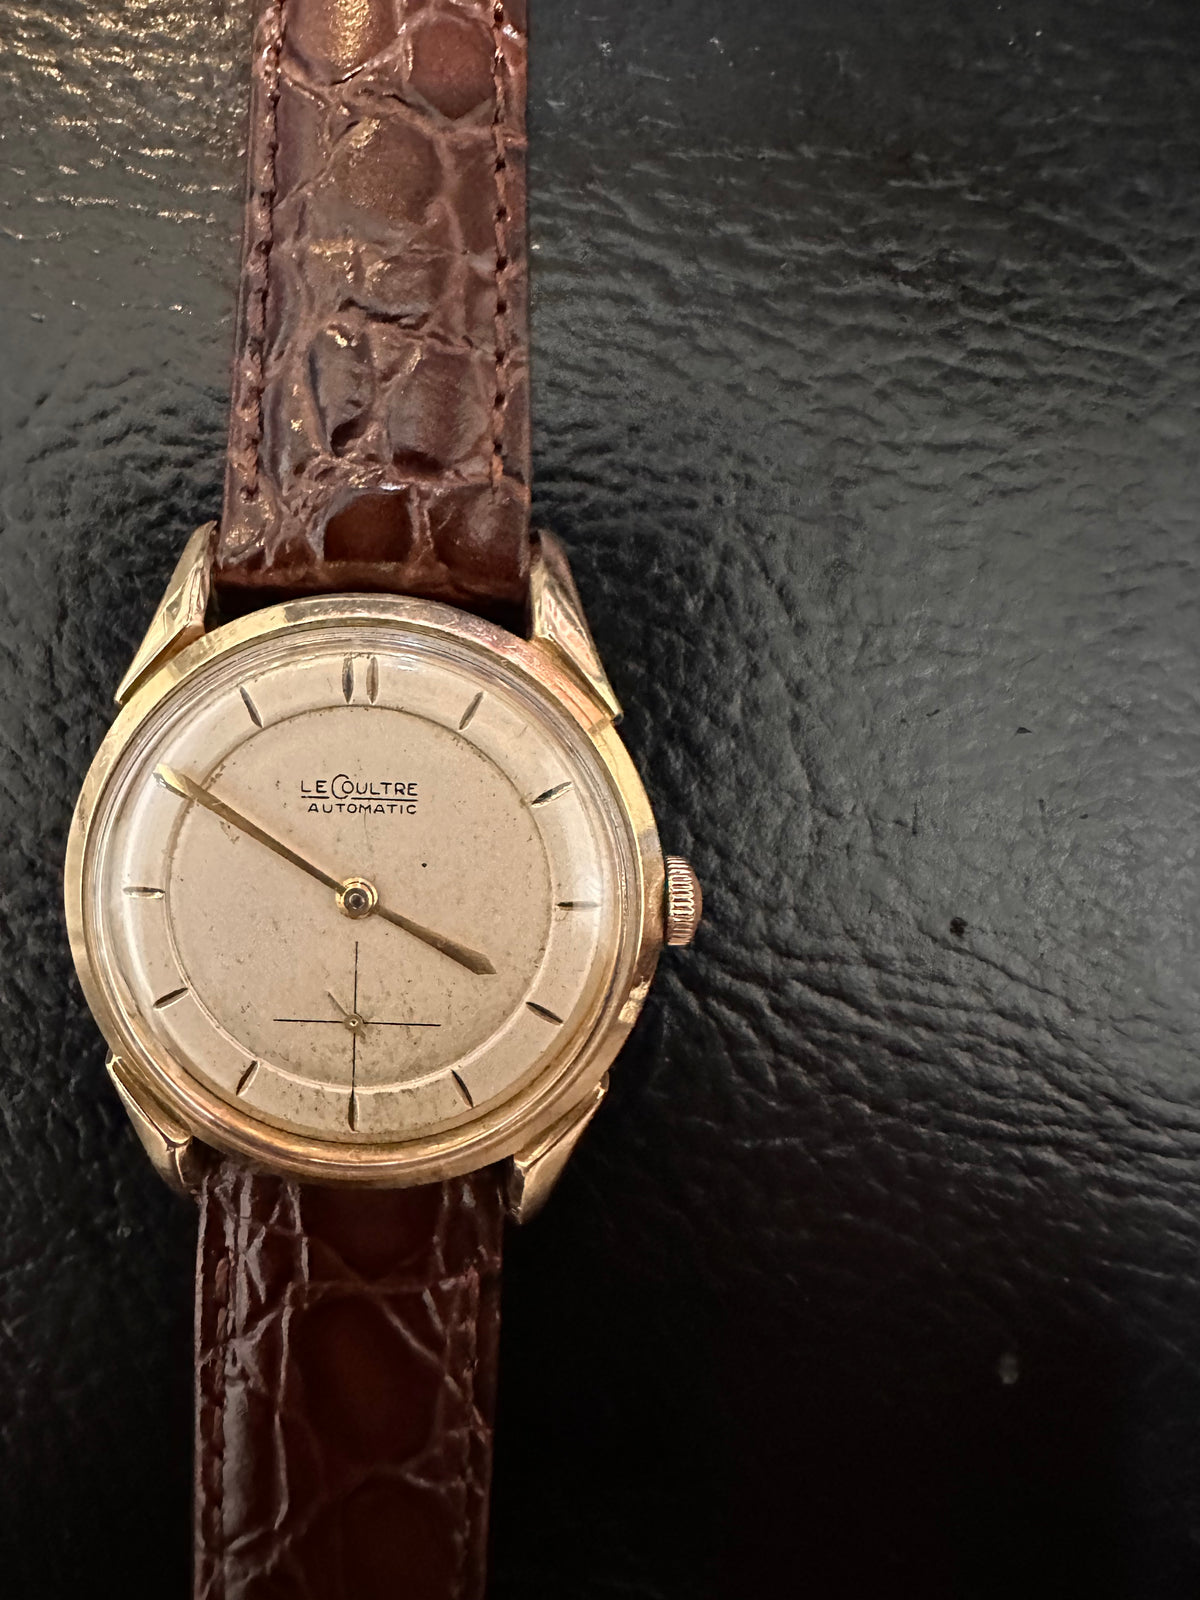 Jaeger LeCoultre 1950s Bumper Automatic, Patina Dial, Fancy Crab Lugs, P812 1950s 10kt Gold Filled Case - Johny Watches